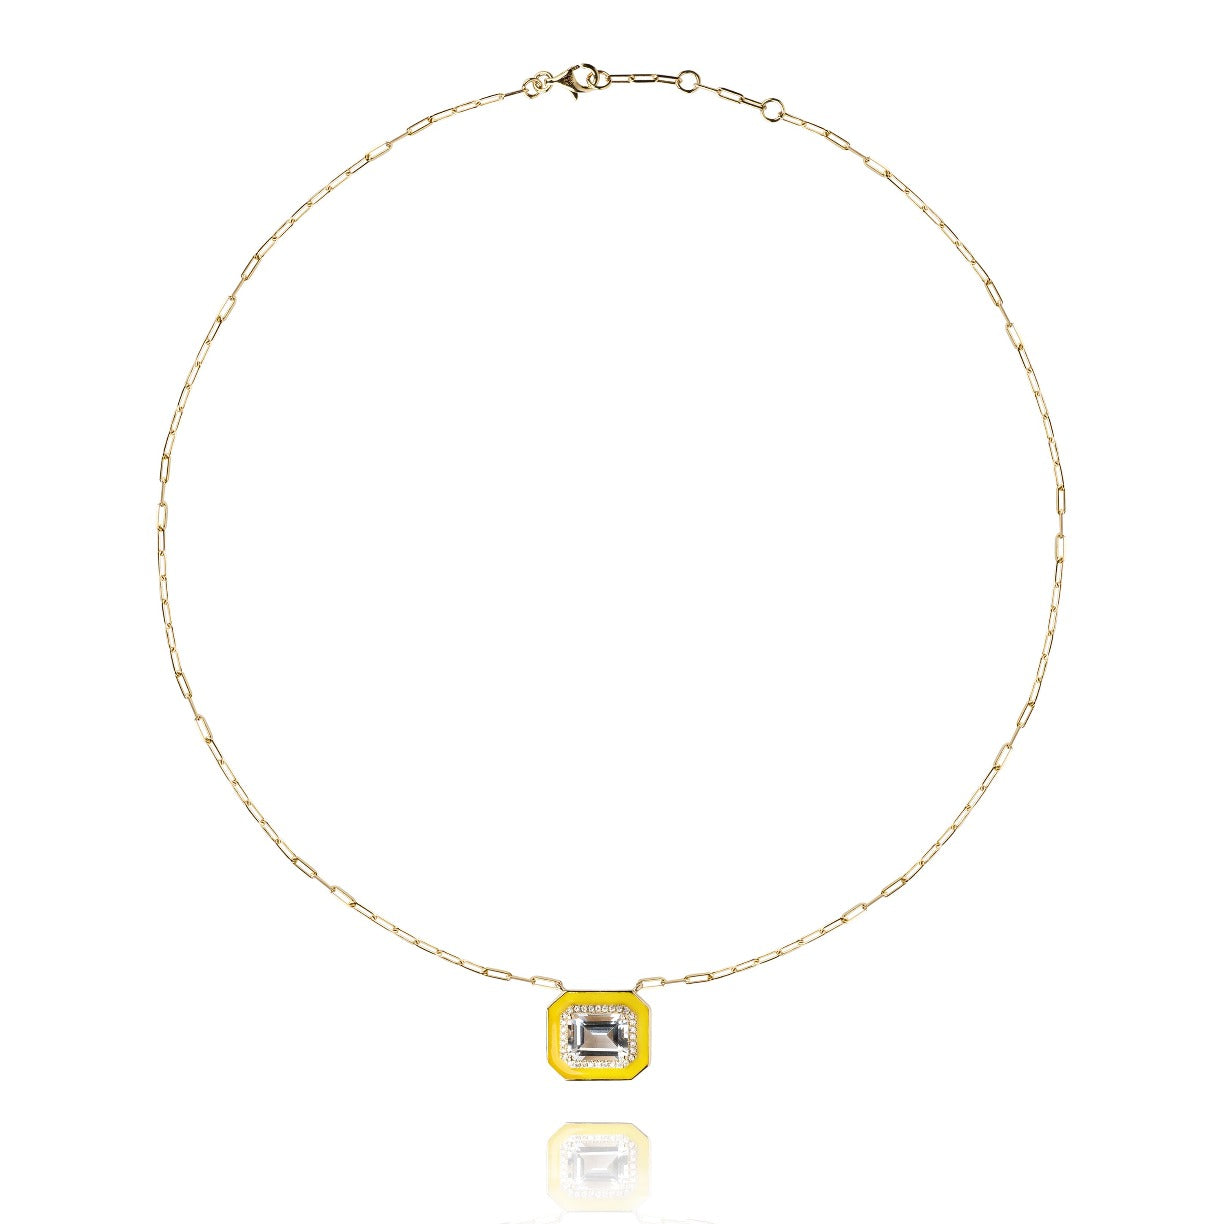 sunny yellow necklace